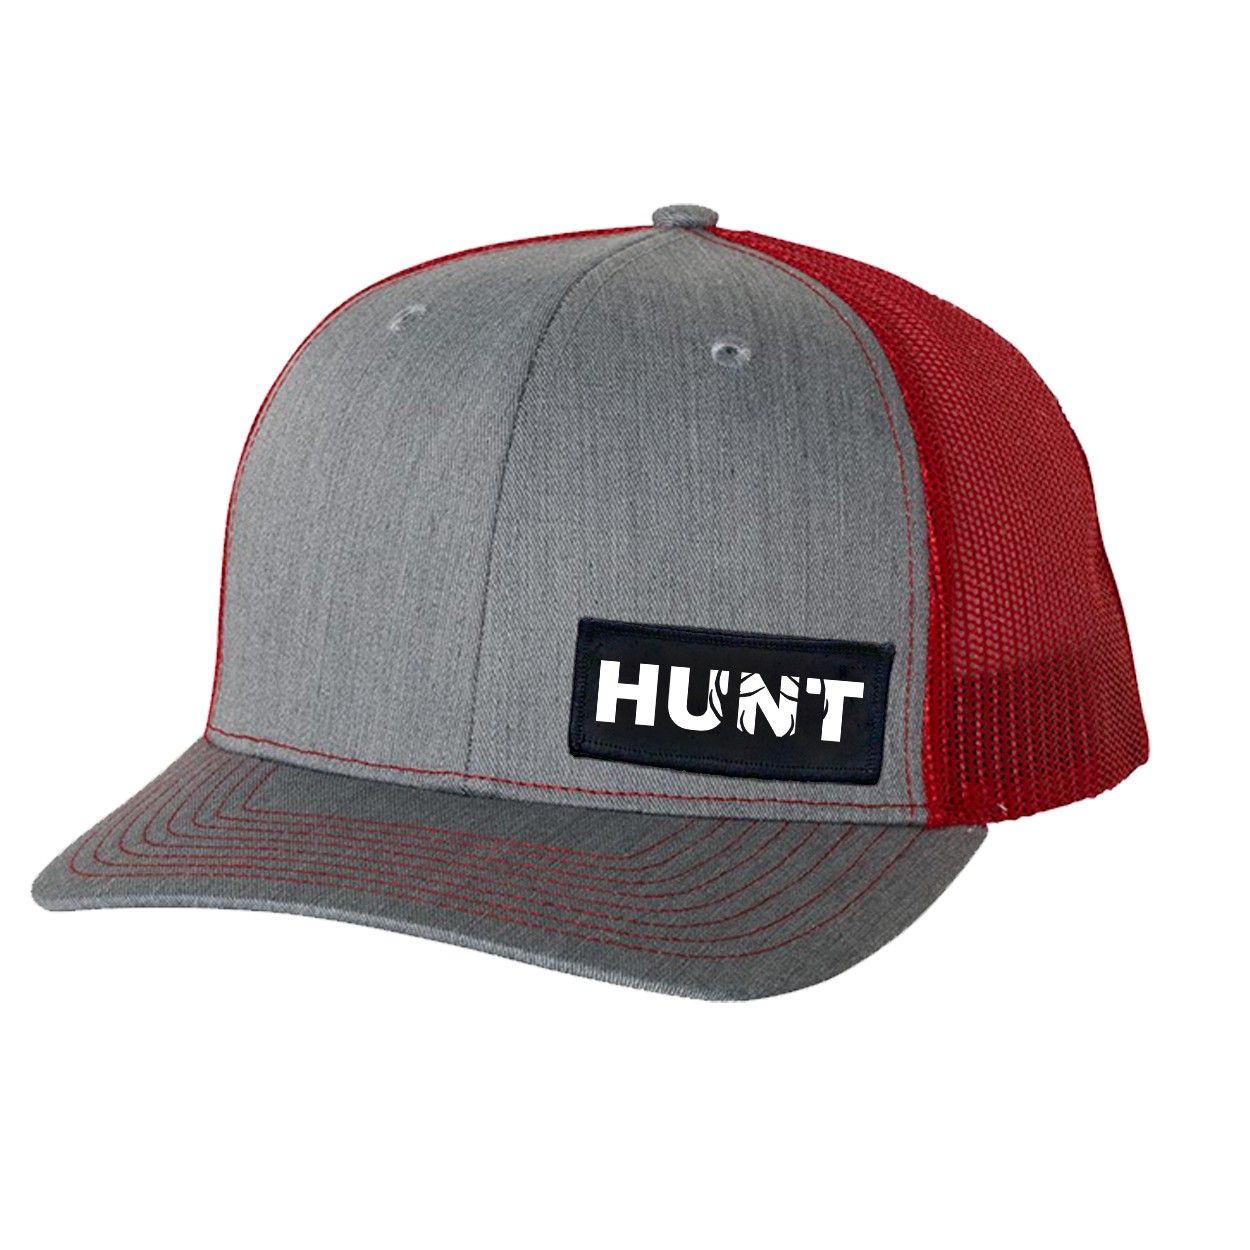 Hunt Rack Logo Night Out Woven Patch Snapback Trucker Hat Heather Heather Grey/Red (White Logo)